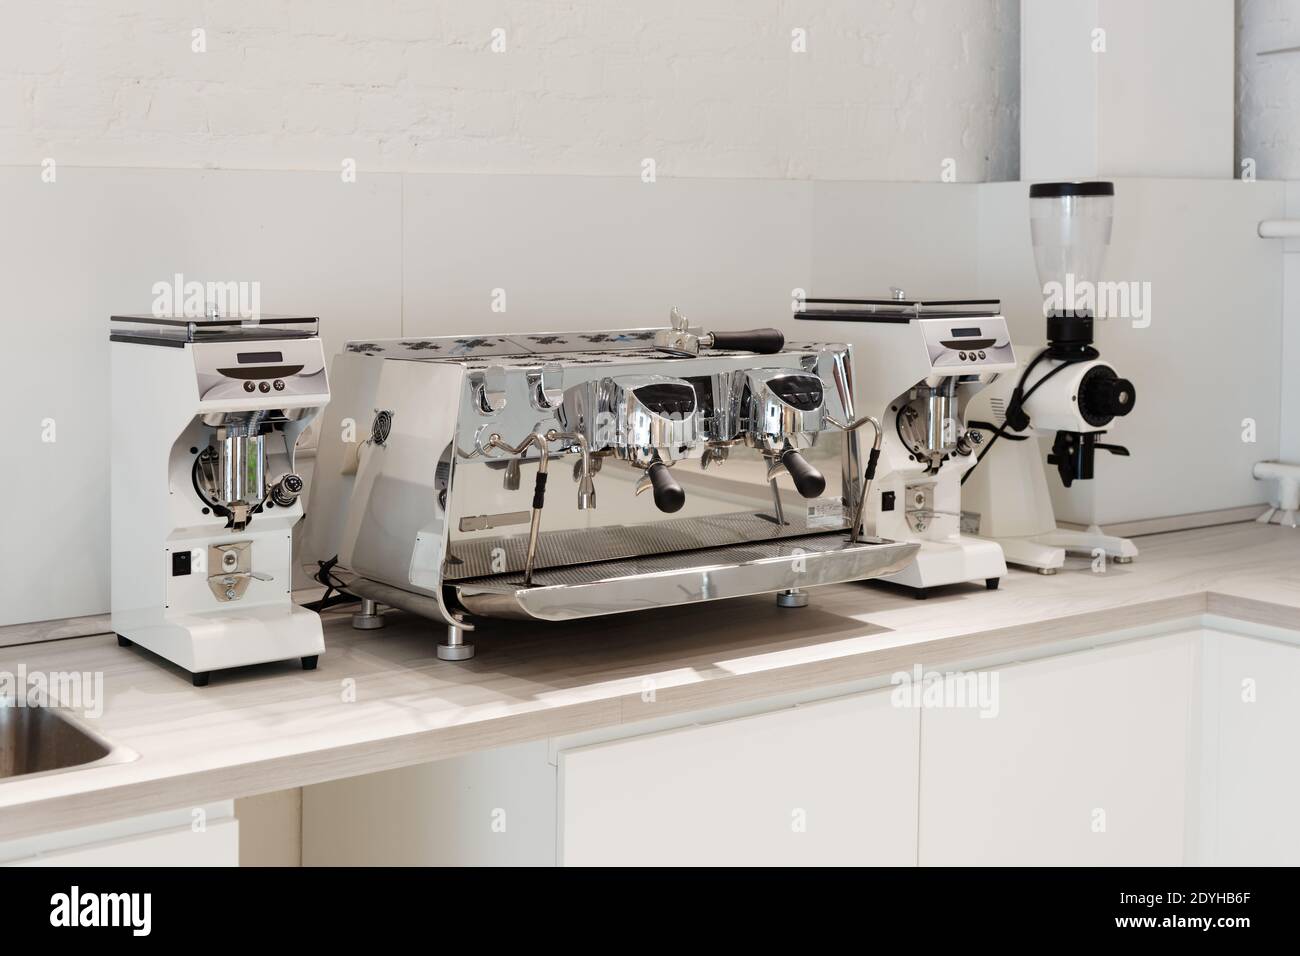 Traditional professional Italian espresso machine and coffee grinders in the new kitchen Stock Photo